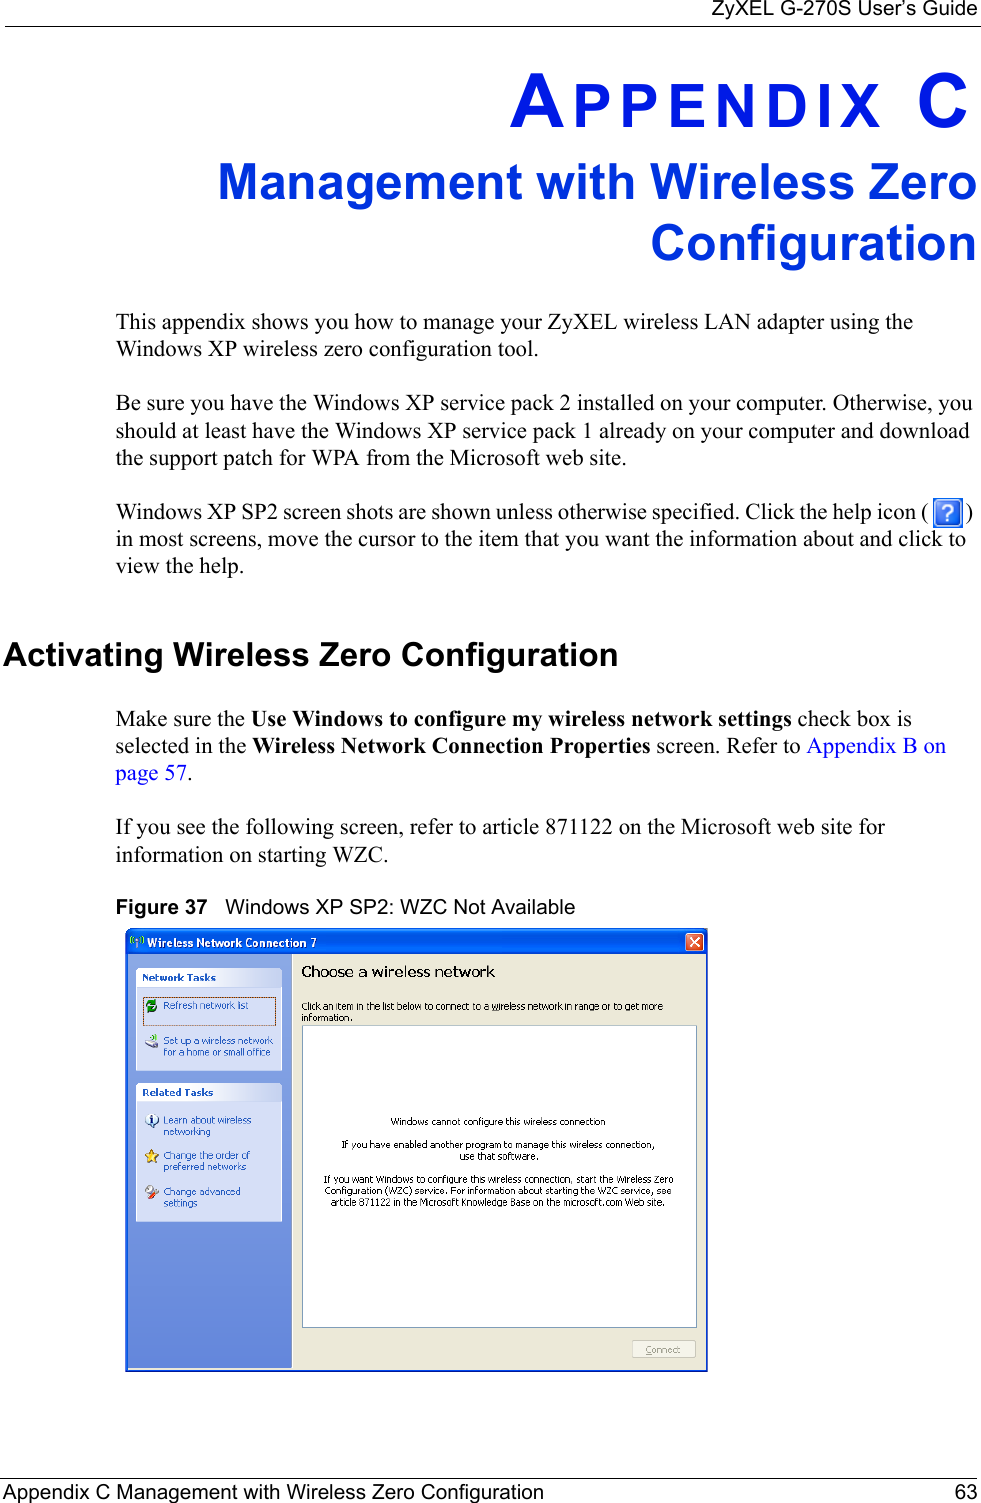 ZyXEL G-270S User’s GuideAppendix C Management with Wireless Zero Configuration 63APPENDIX CManagement with Wireless ZeroConfigurationThis appendix shows you how to manage your ZyXEL wireless LAN adapter using the Windows XP wireless zero configuration tool.Be sure you have the Windows XP service pack 2 installed on your computer. Otherwise, you should at least have the Windows XP service pack 1 already on your computer and download the support patch for WPA from the Microsoft web site.Windows XP SP2 screen shots are shown unless otherwise specified. Click the help icon ( ) in most screens, move the cursor to the item that you want the information about and click to view the help.Activating Wireless Zero ConfigurationMake sure the Use Windows to configure my wireless network settings check box is selected in the Wireless Network Connection Properties screen. Refer to Appendix B on page 57.If you see the following screen, refer to article 871122 on the Microsoft web site for information on starting WZC.Figure 37   Windows XP SP2: WZC Not Available